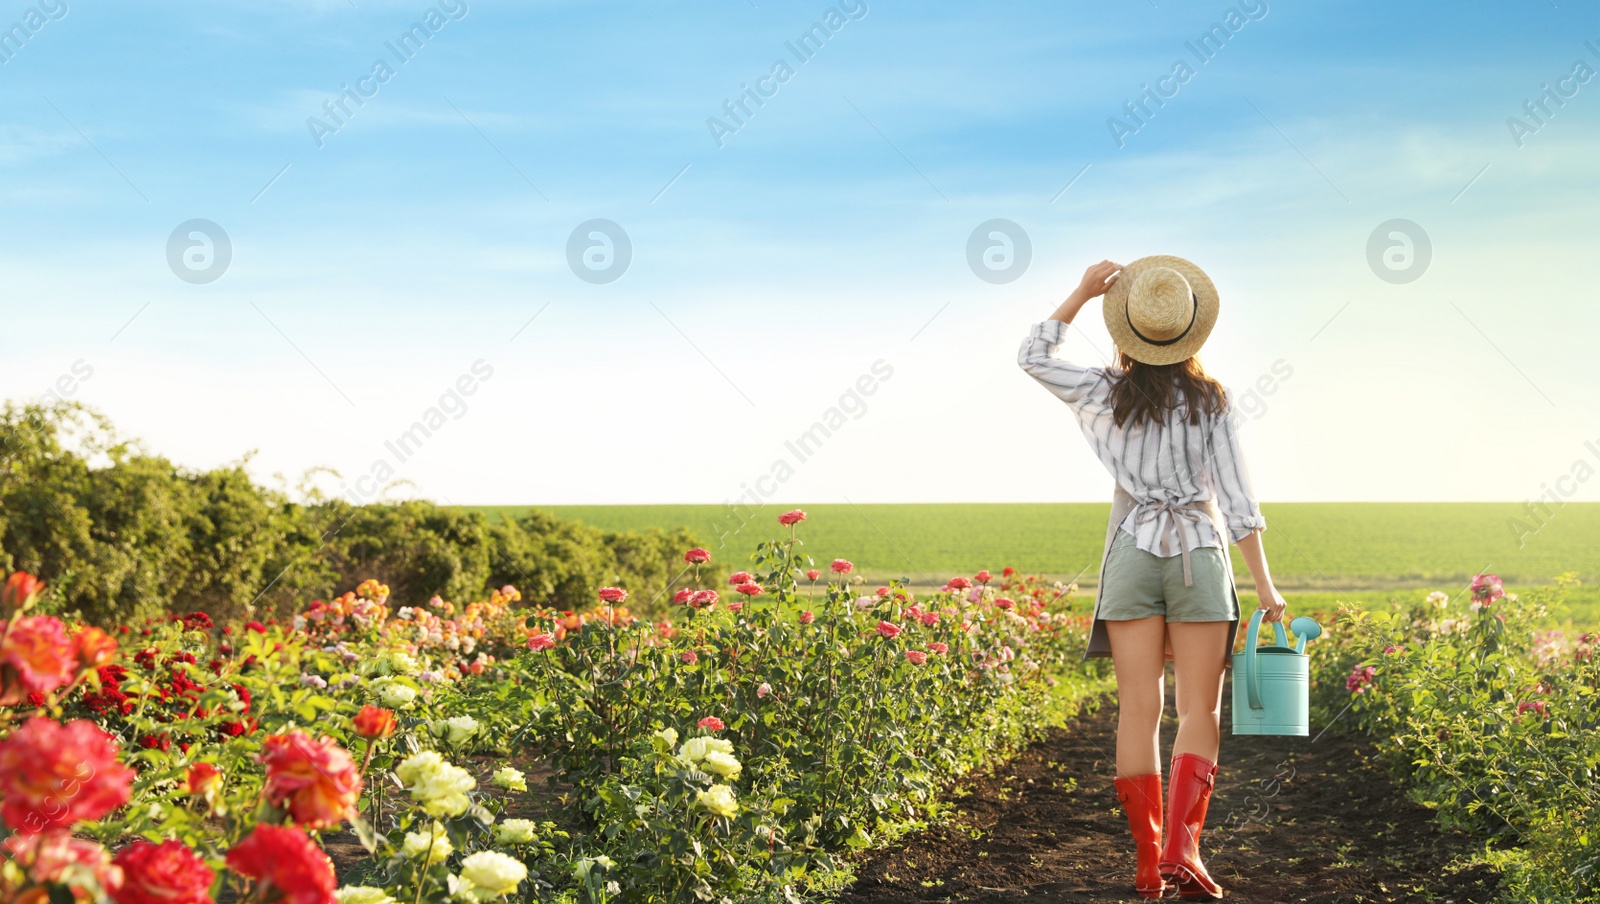 Photo of Woman with watering can walking near rose bushes outdoors. Gardening tool